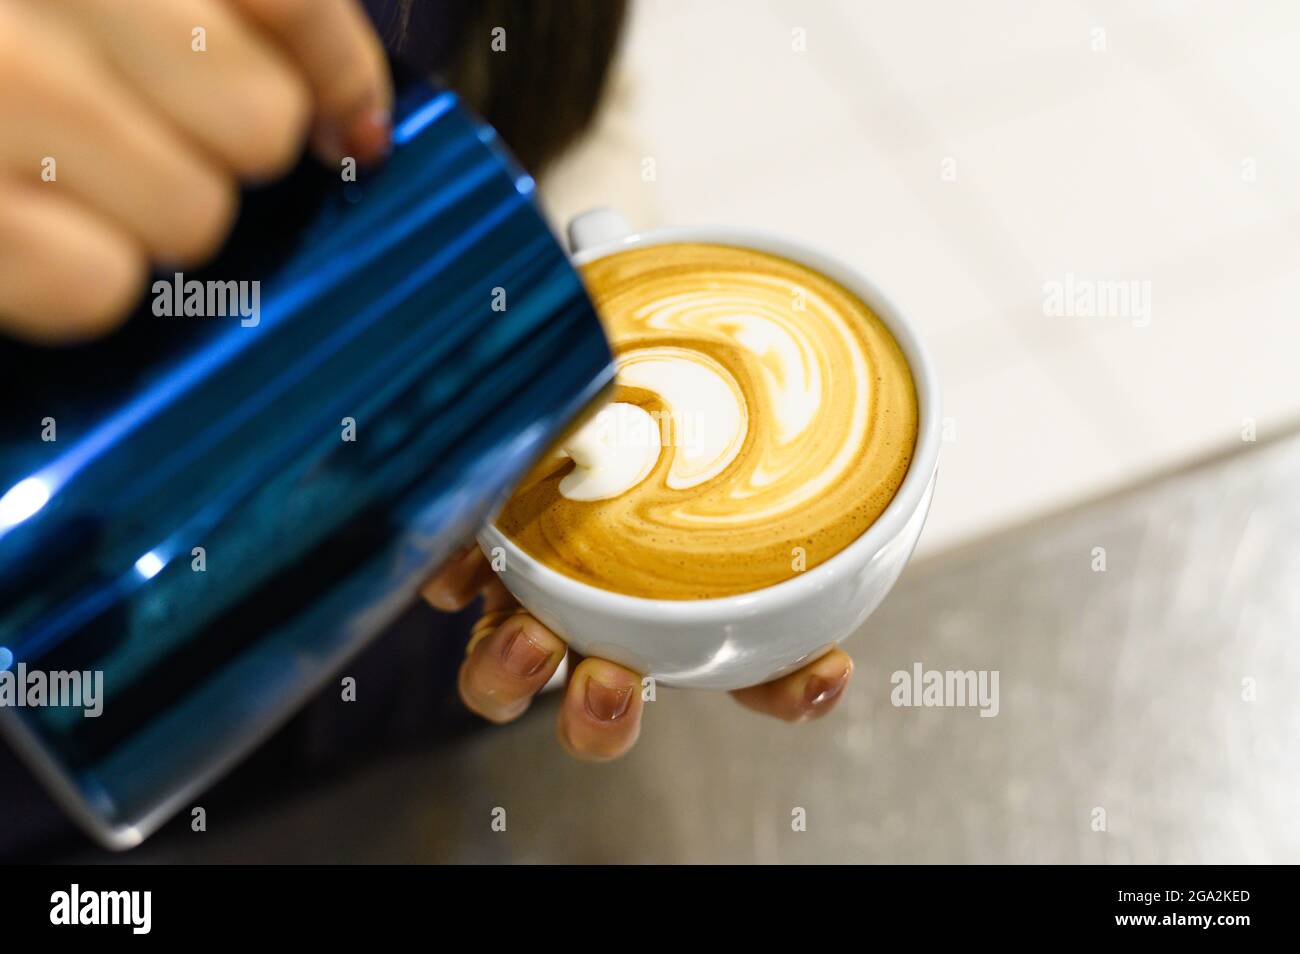 Hands of barista making latte or cappuccino coffee pouring milk, making latte art. Stock Photo